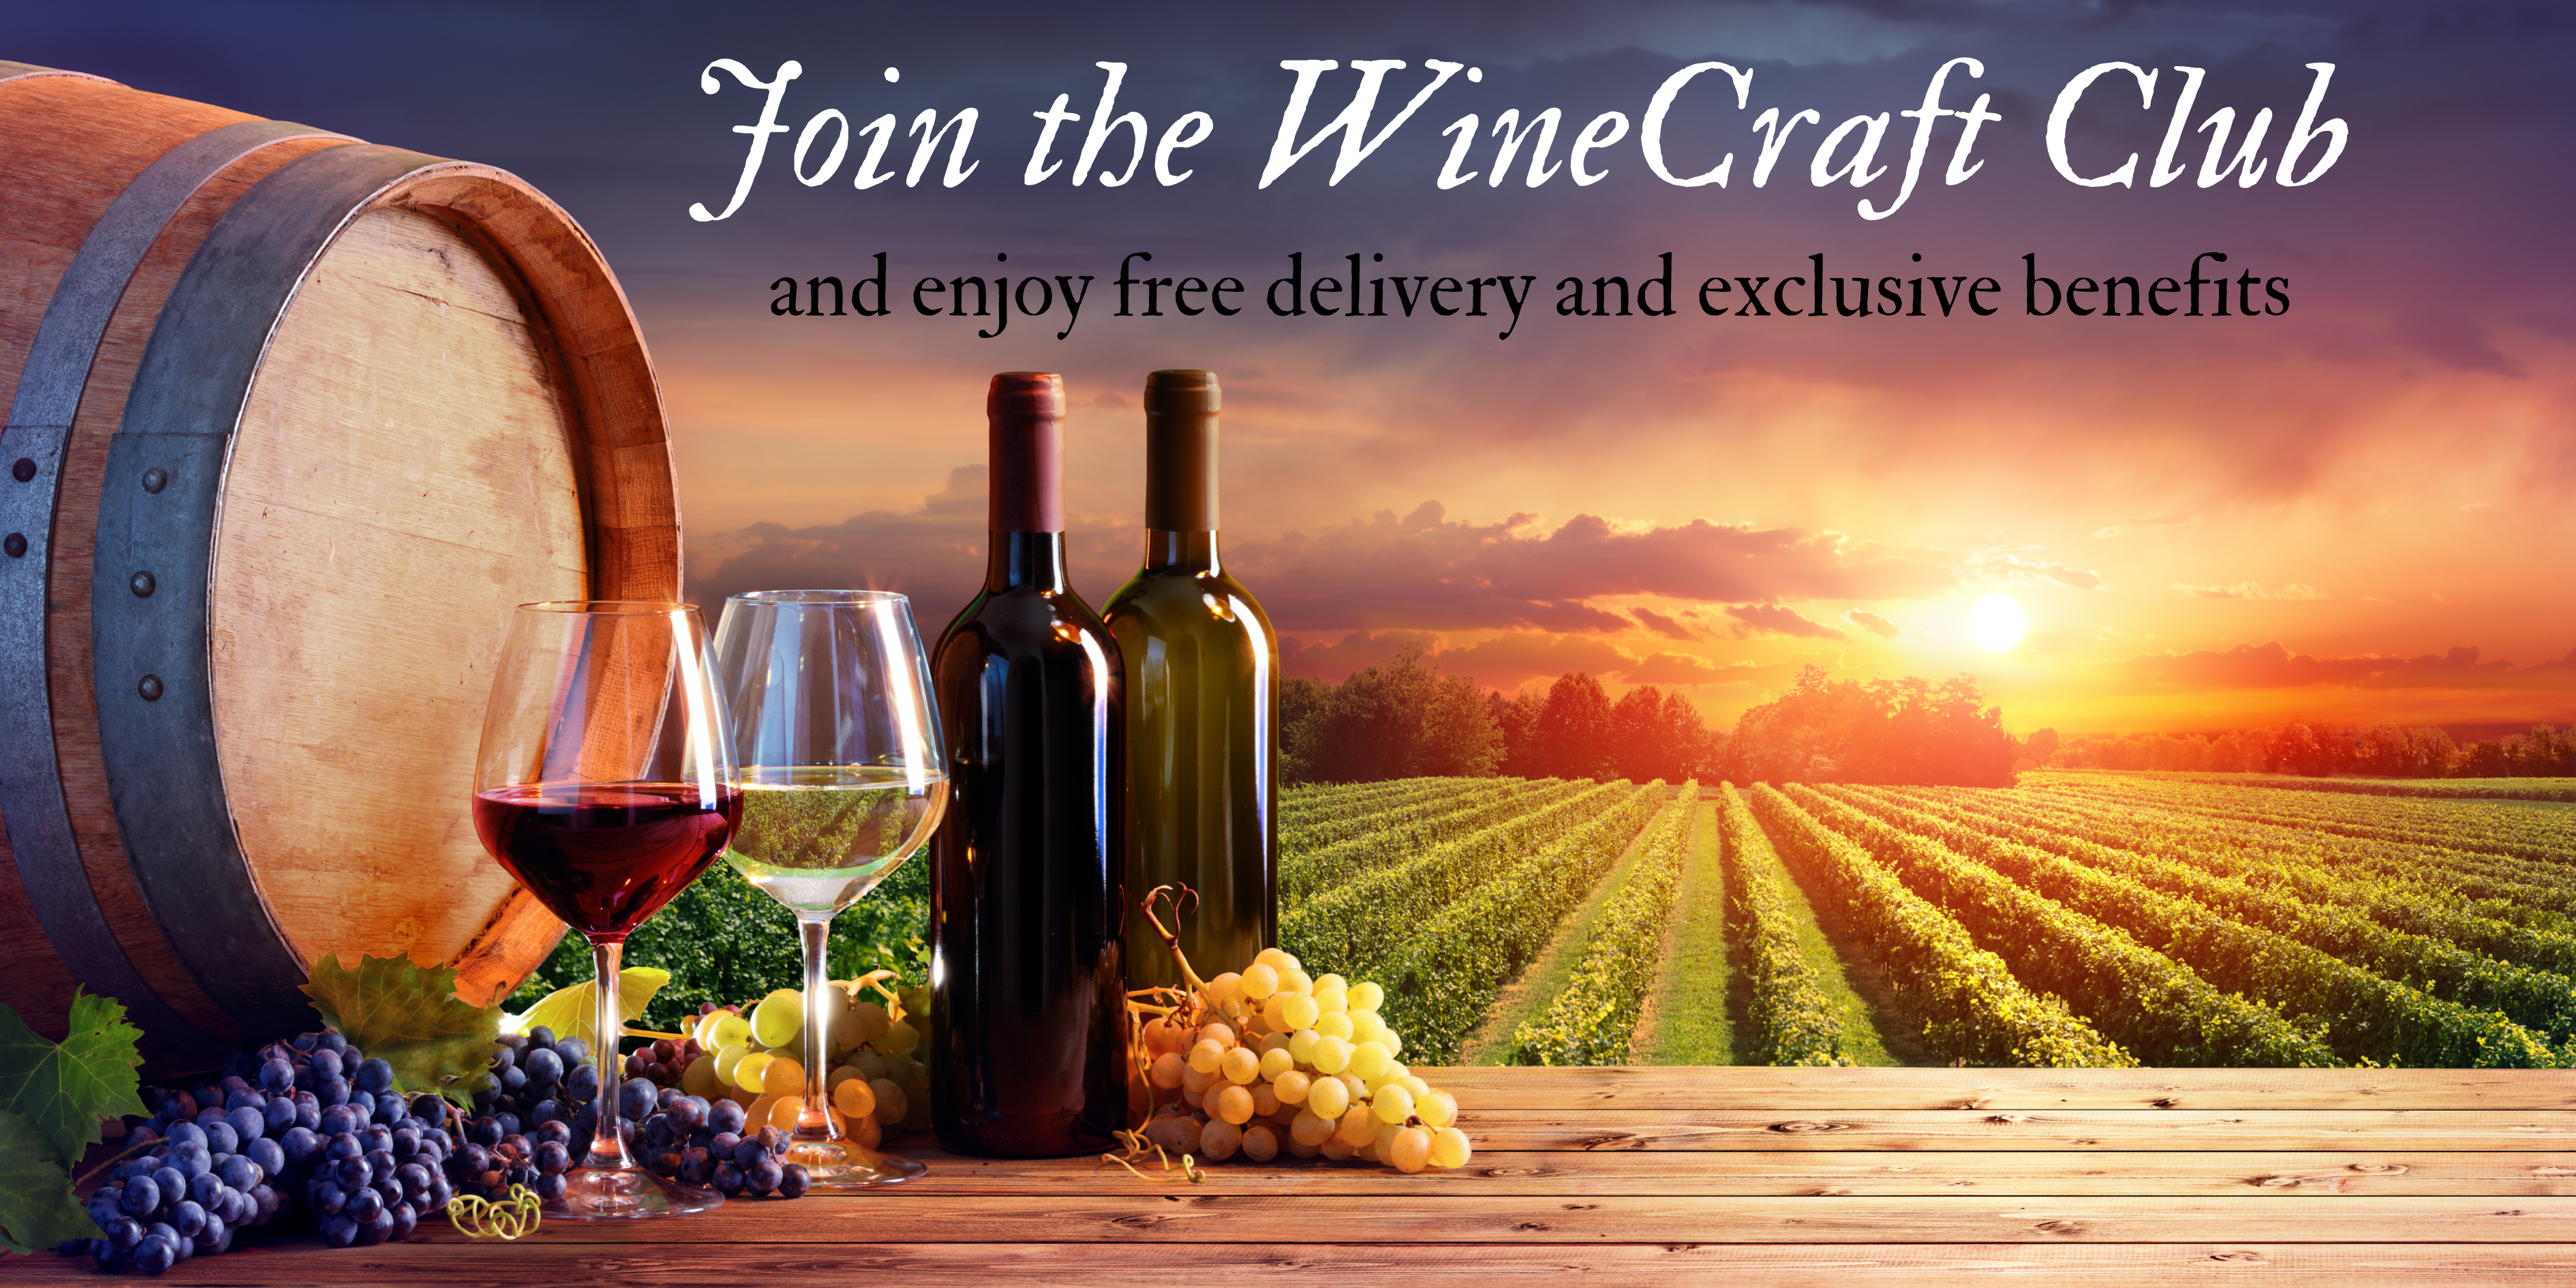 WineCraft club free delivery and exclusive benefits 